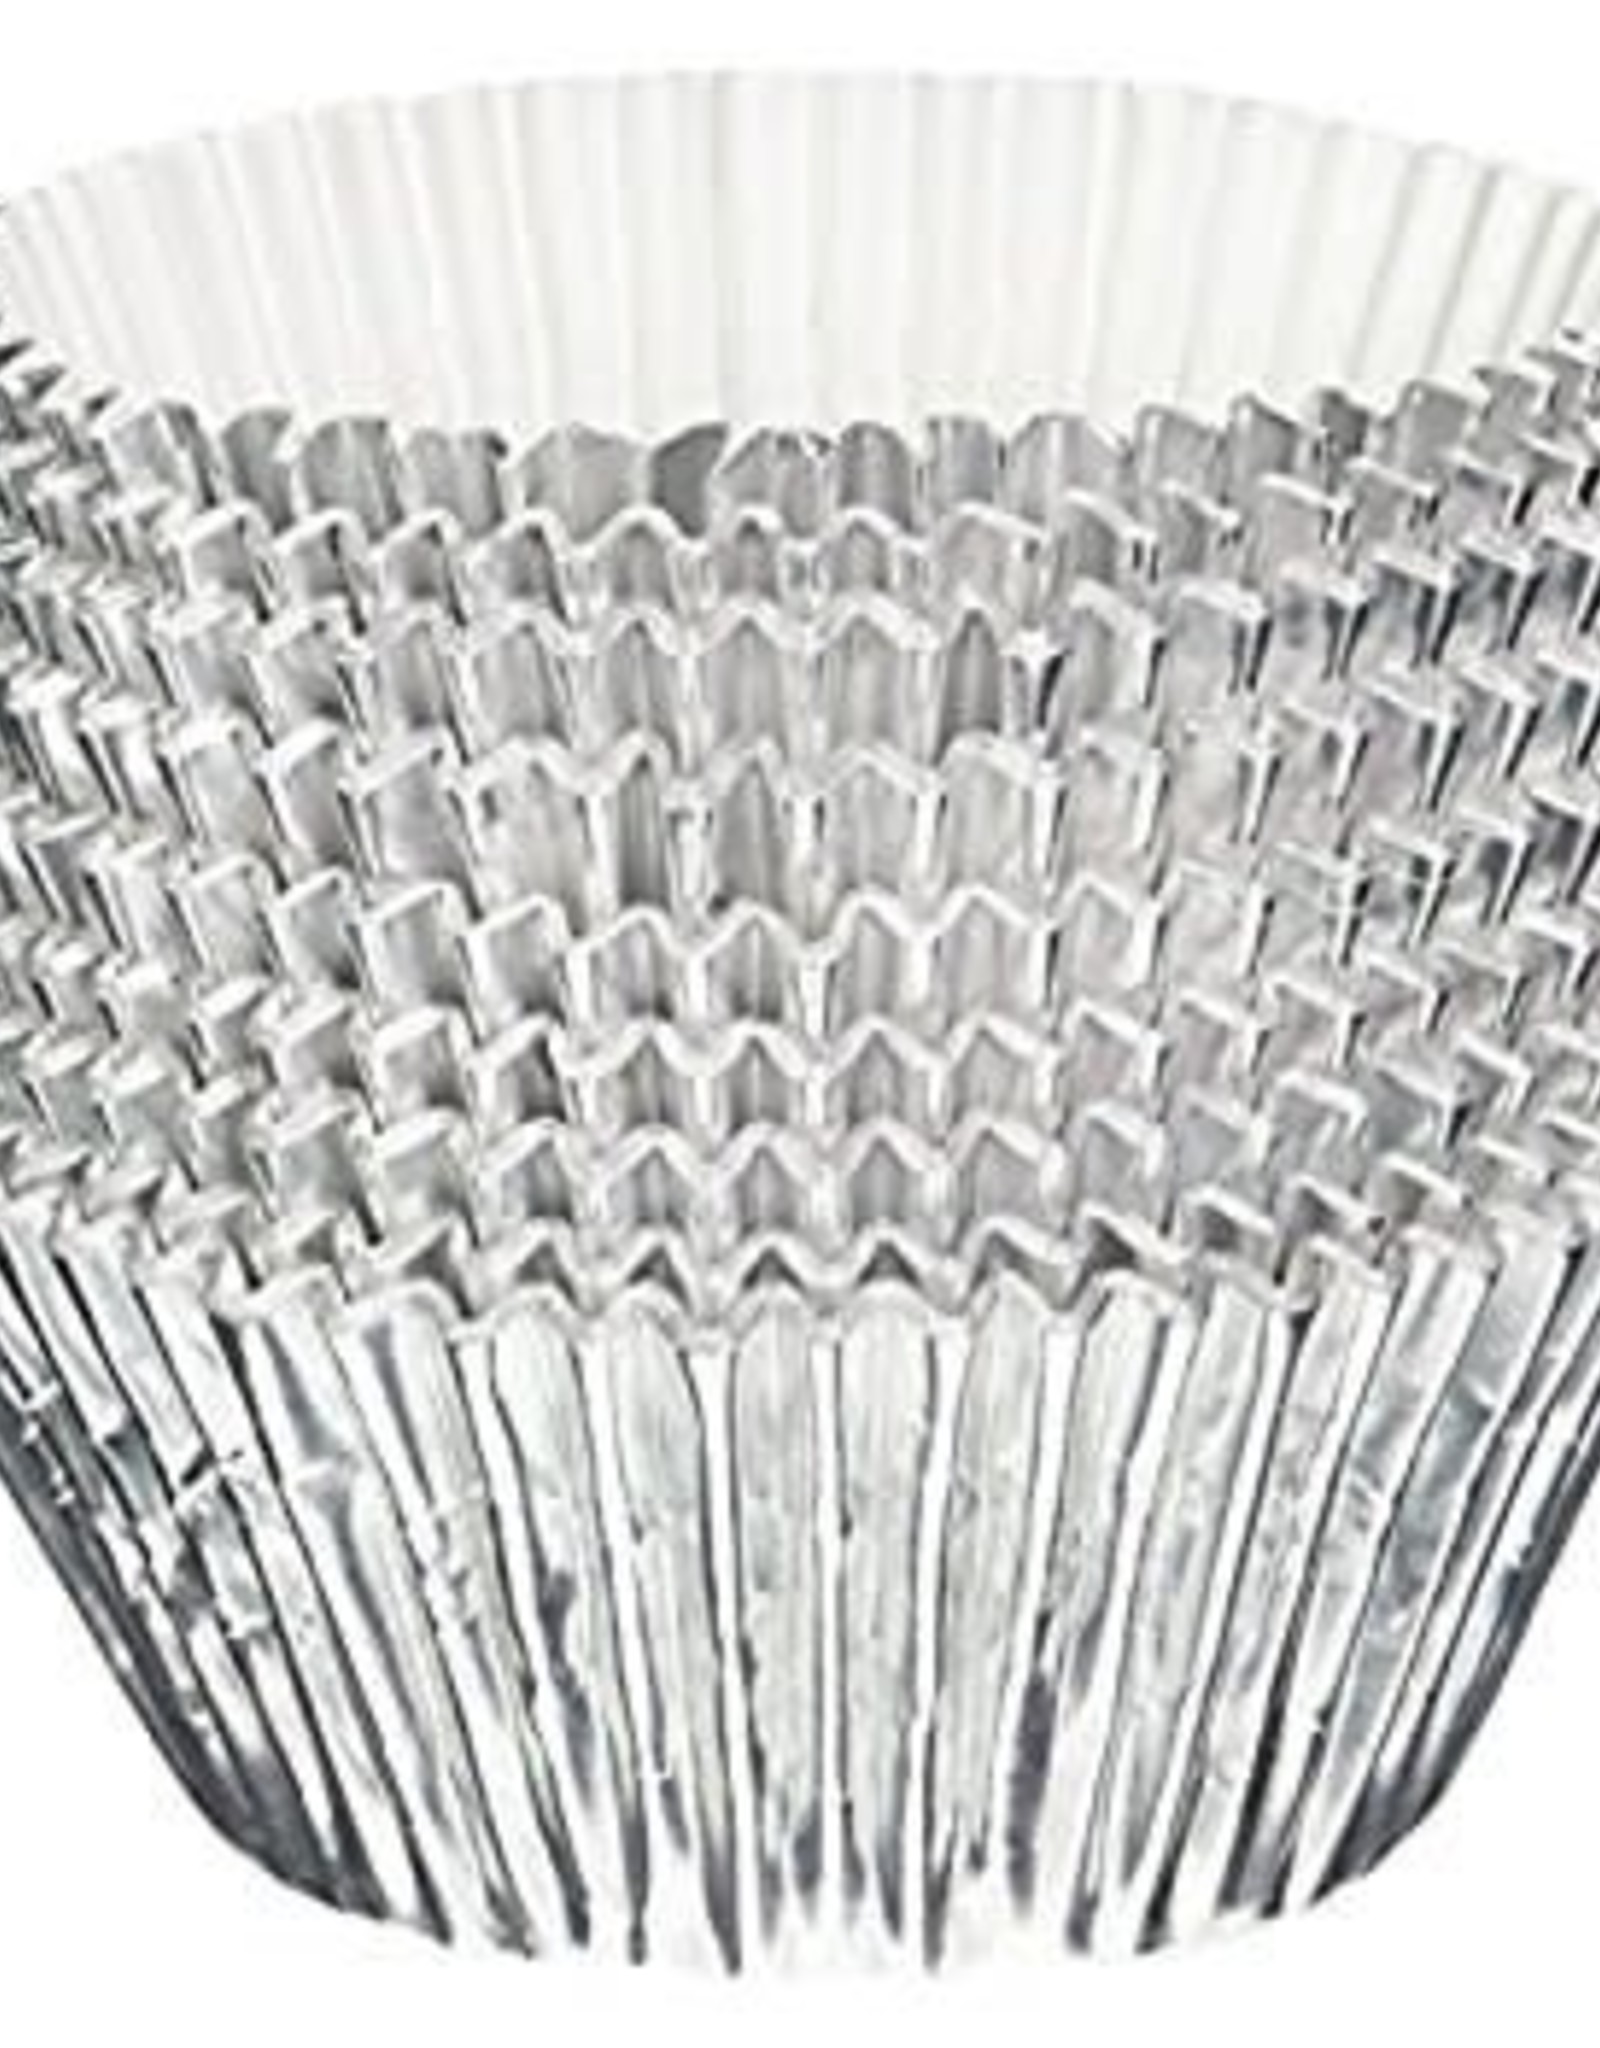 Silver Foil Jumbo Baking Cups (24 ct)